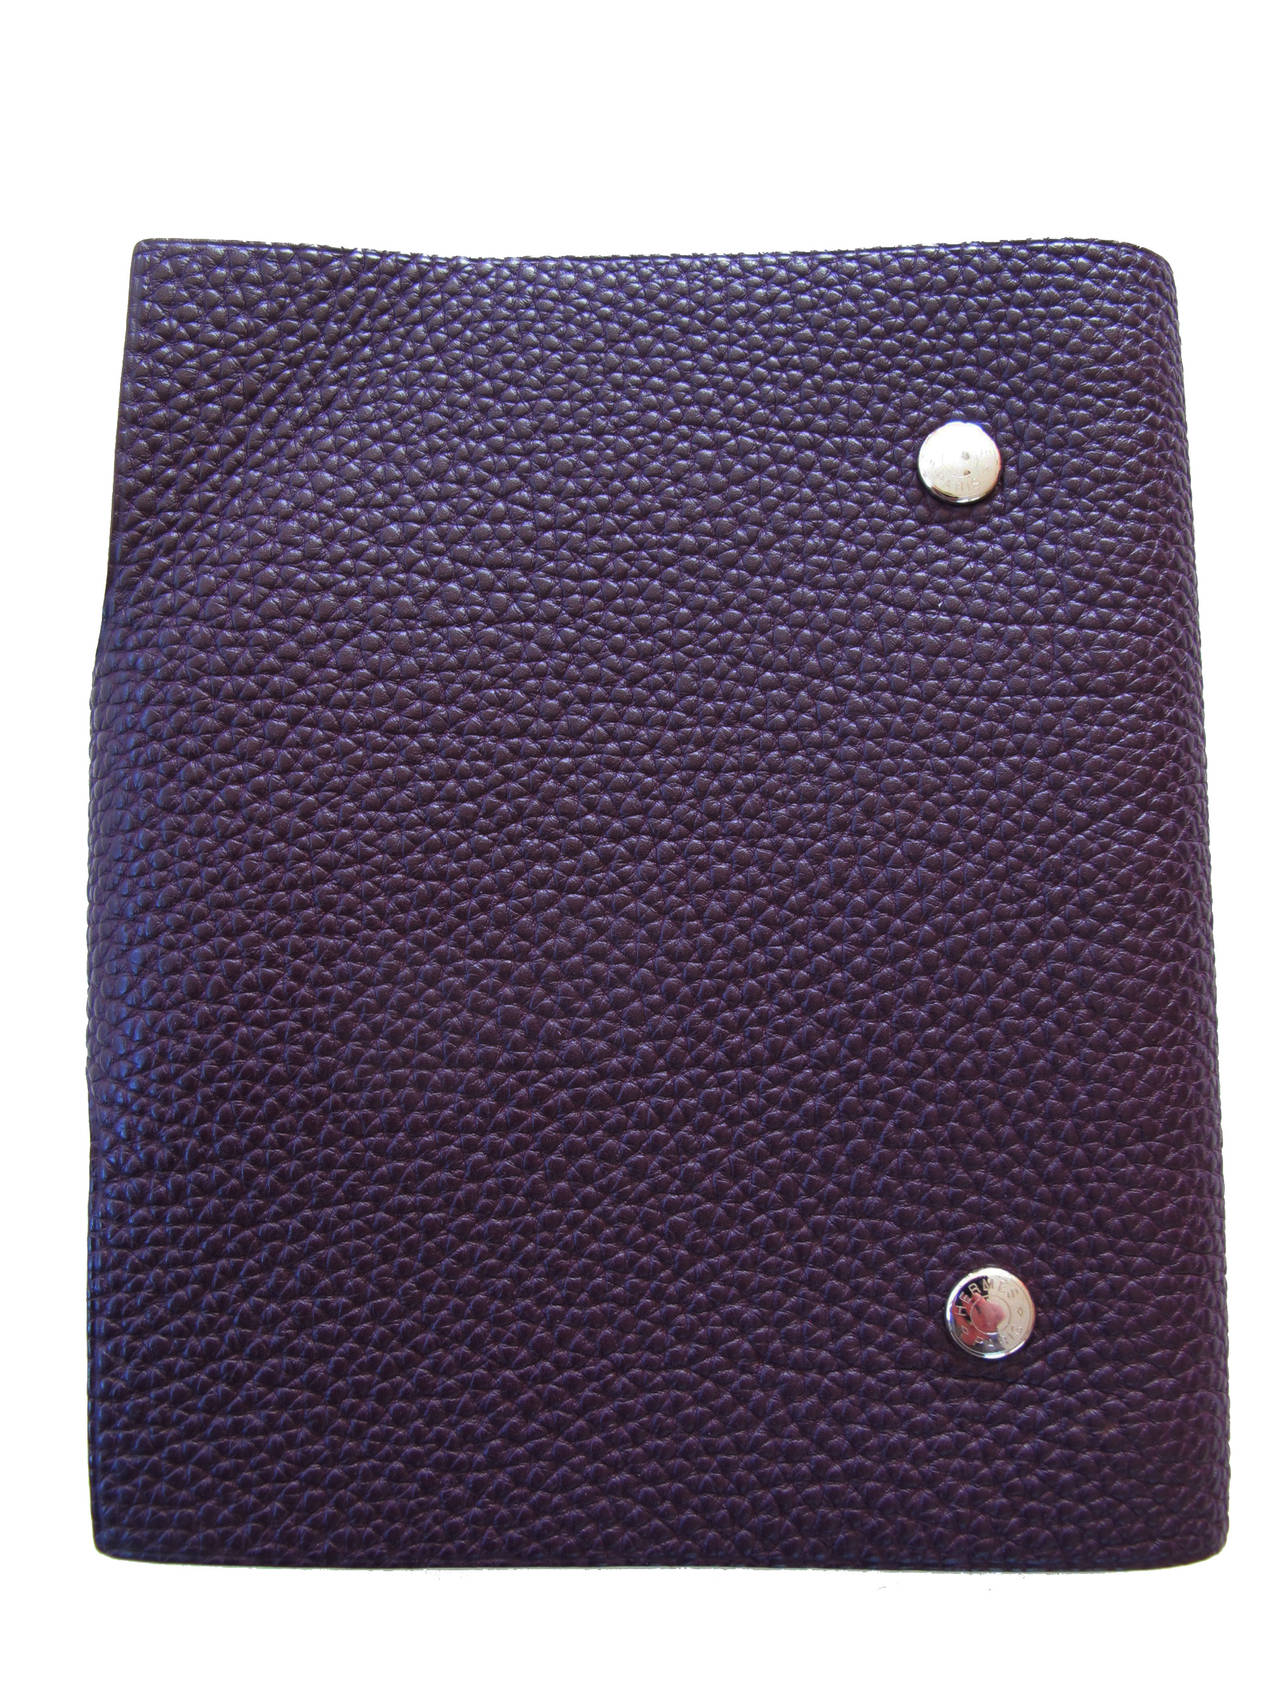 The Hermes Ulysse Eggplant Notebook has a leather tab with silver and palladium snap closure. Togo calfskin. The page refill notebook has the H plastic logo on the 1st page. The notebook itself has colorful pages: fuchsia, orange, light split pea